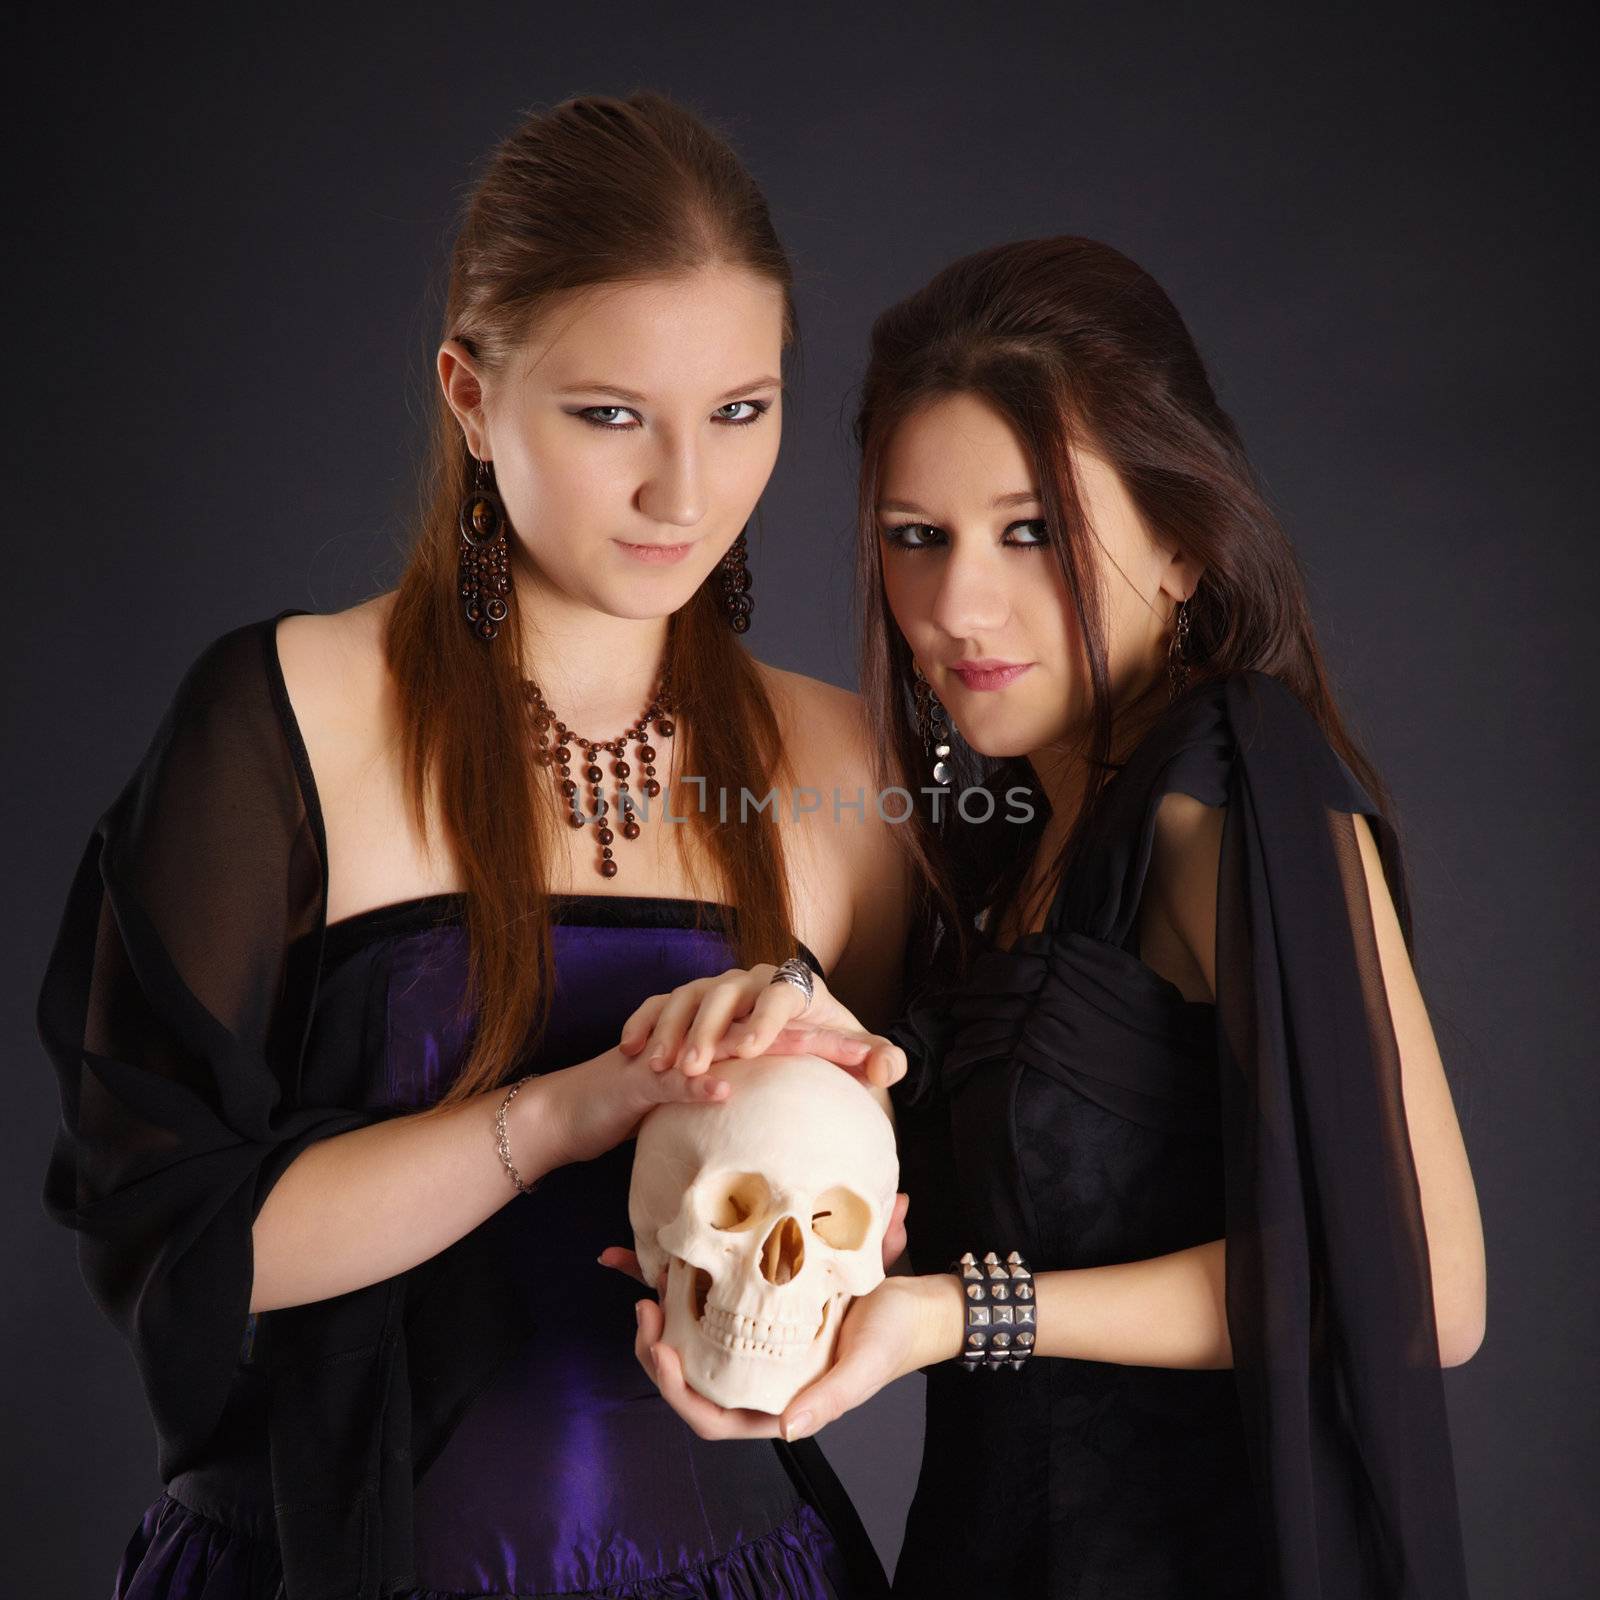 Two young girls with a human skull by pzaxe